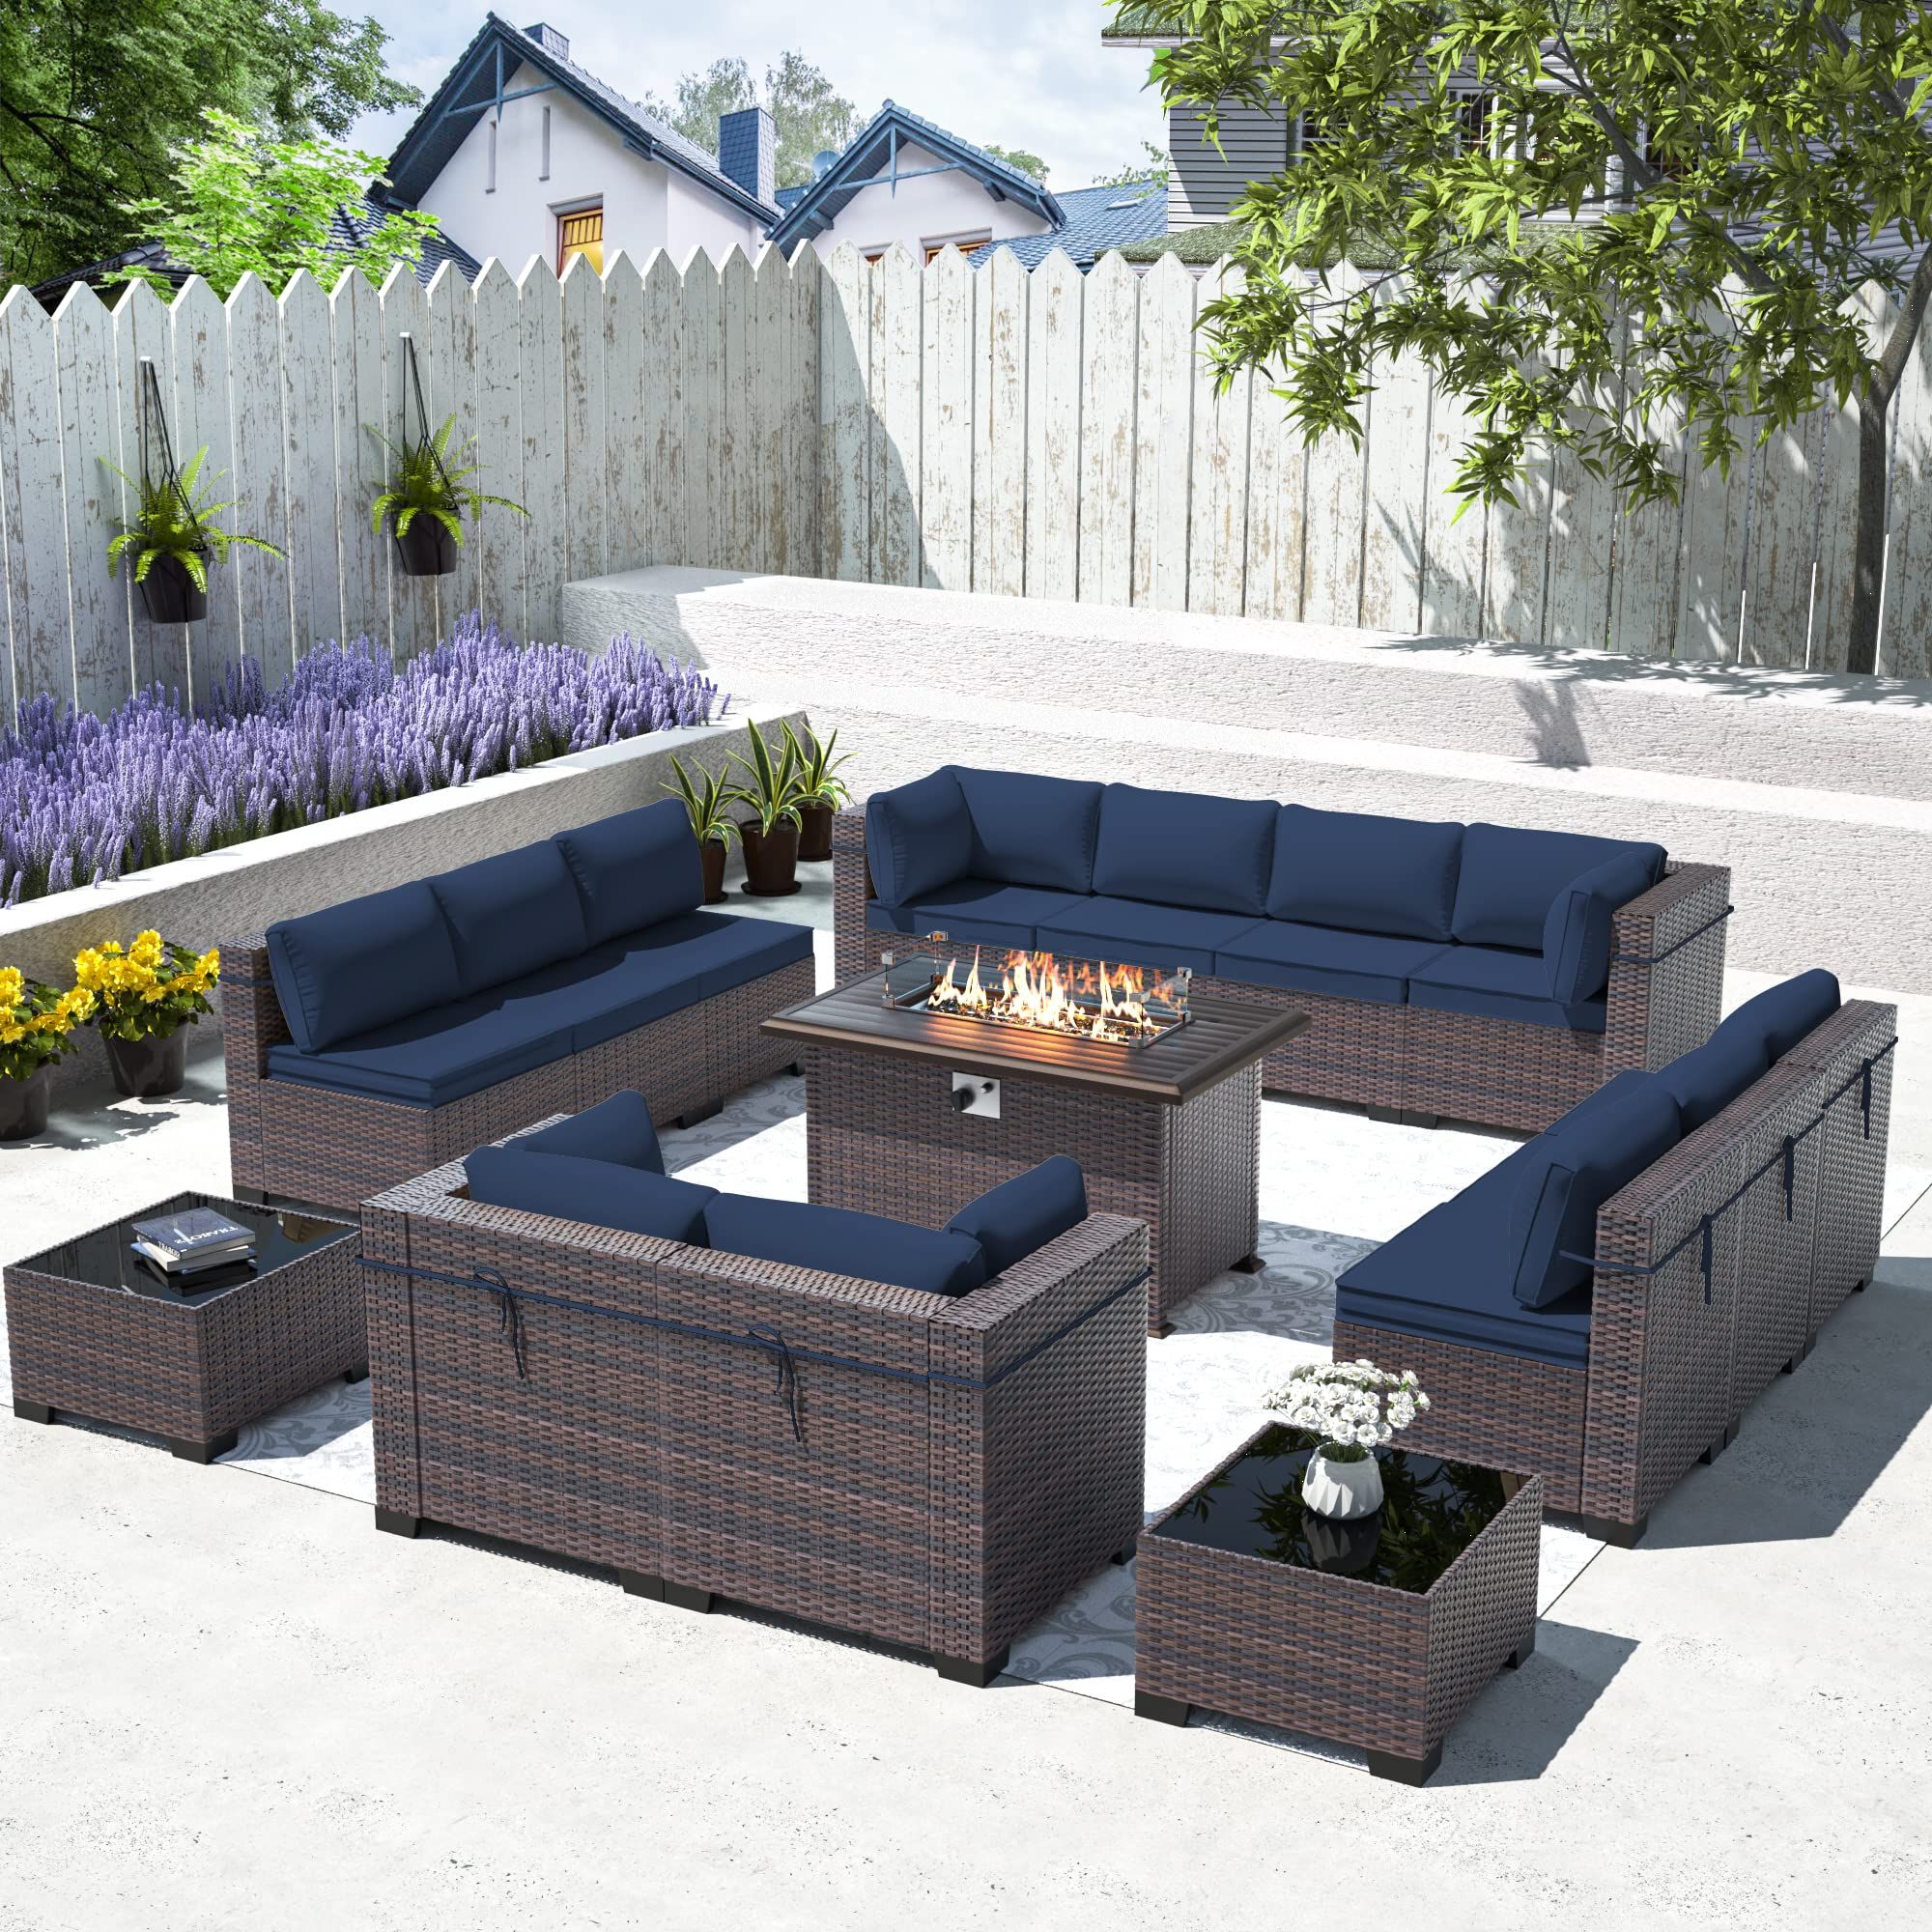 Favorite Amazon: Asjmr Outdoor Patio Furniture Set With Gas Fire Pit Table, 15  Pieces Outdoor Furniture Set Patio Sectional Sofa W/43in Propane Fire Pit,  Pe Wicker Rattan Patio Conversation Sets – Navy : For Fire Pit Table Wicker Sectional Sofa Set (View 4 of 15)